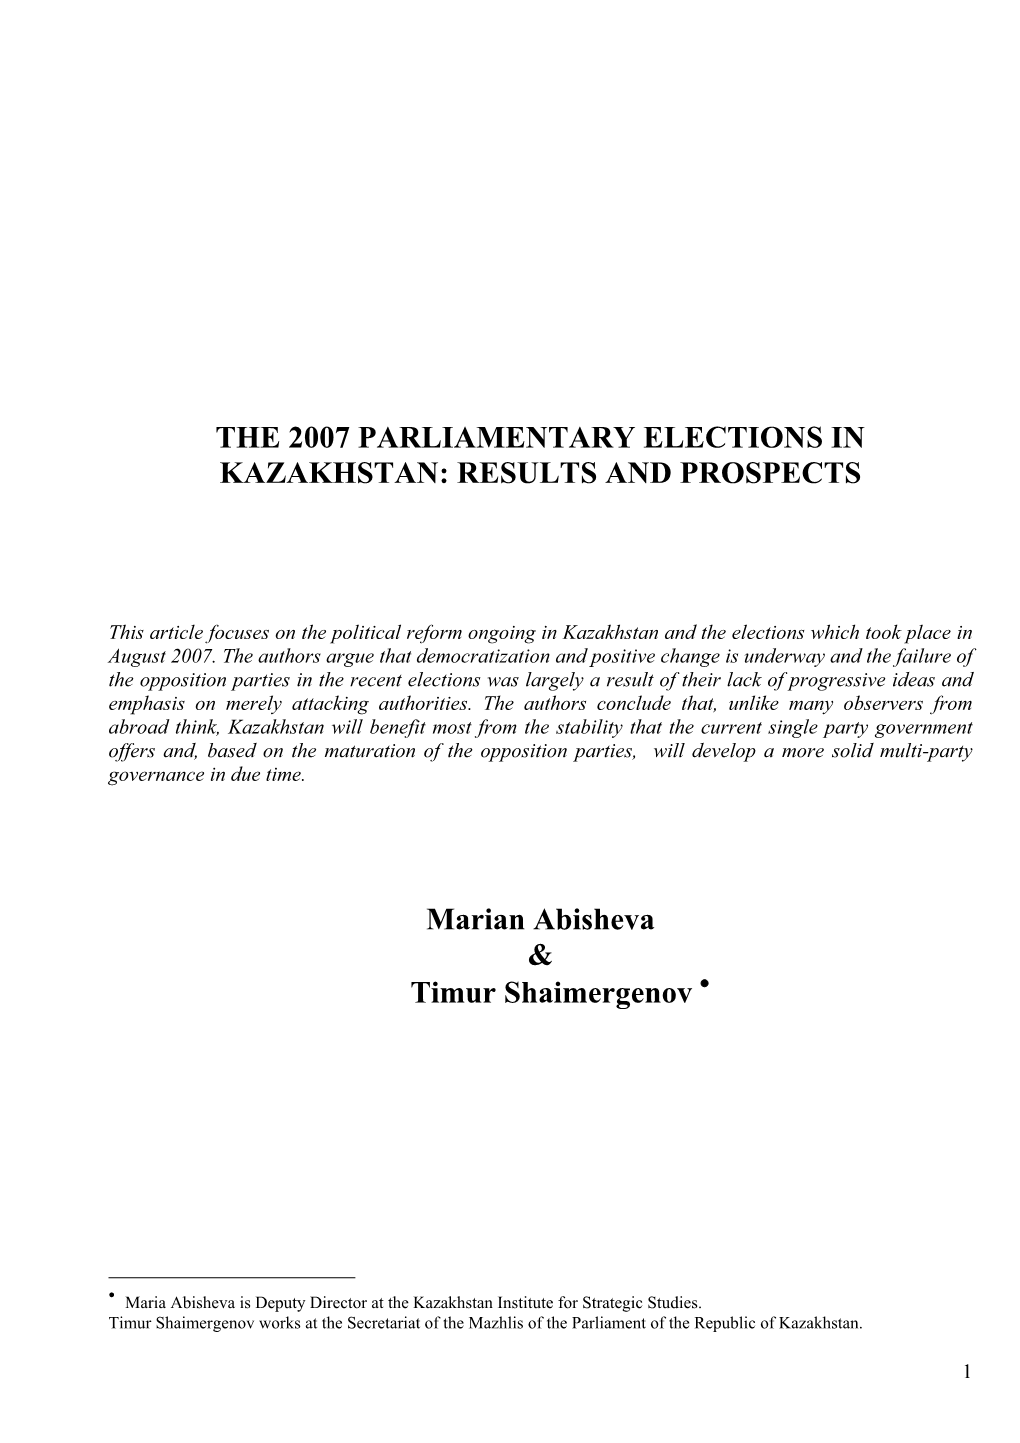 The 2007 Parliamentary Elections in Kazakhstan: Results and Prospects